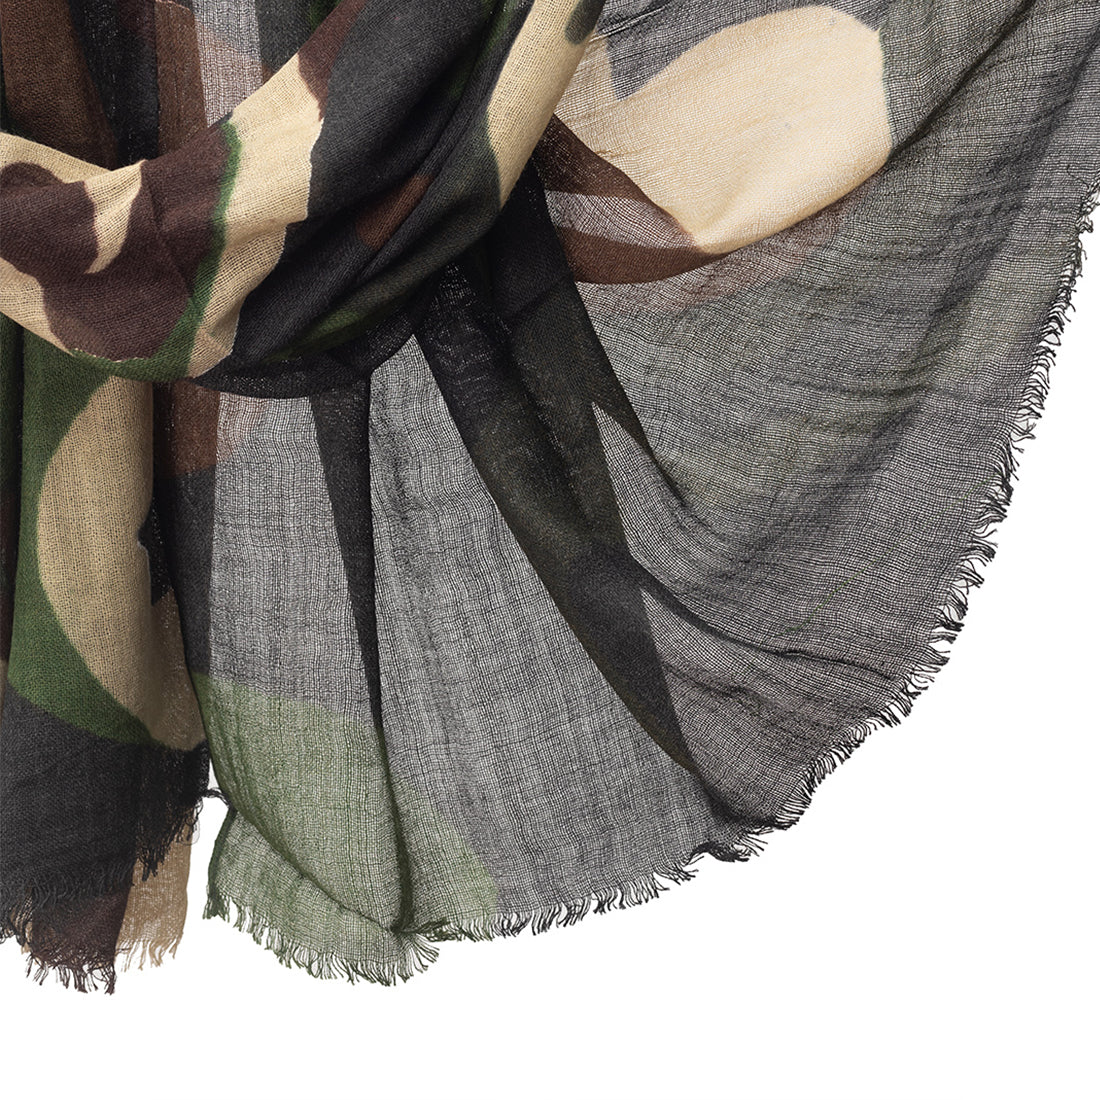 Fashion-Forward Woolen Camouflage Scarf Merges With A Bold, Contemporary Design.